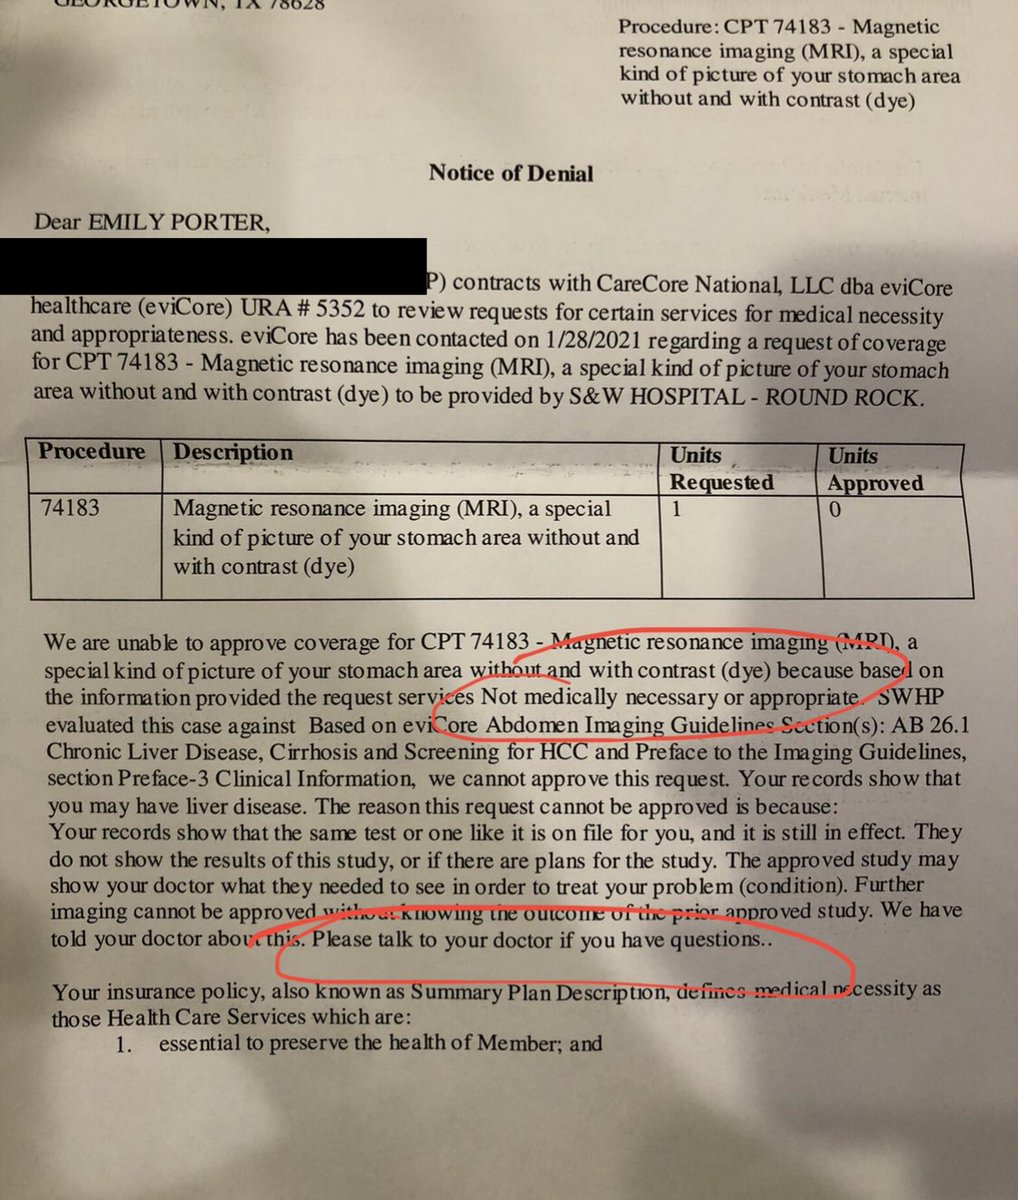 Had a CT showing renal & liver masses w/ kidney suspicious for cancer. Radiologist recommended MRI for further characterization. Now my insurance company is refusing to pay for the MRI saying it’s not “medically necessary.” My doc sure as hell thought it was. 1/3